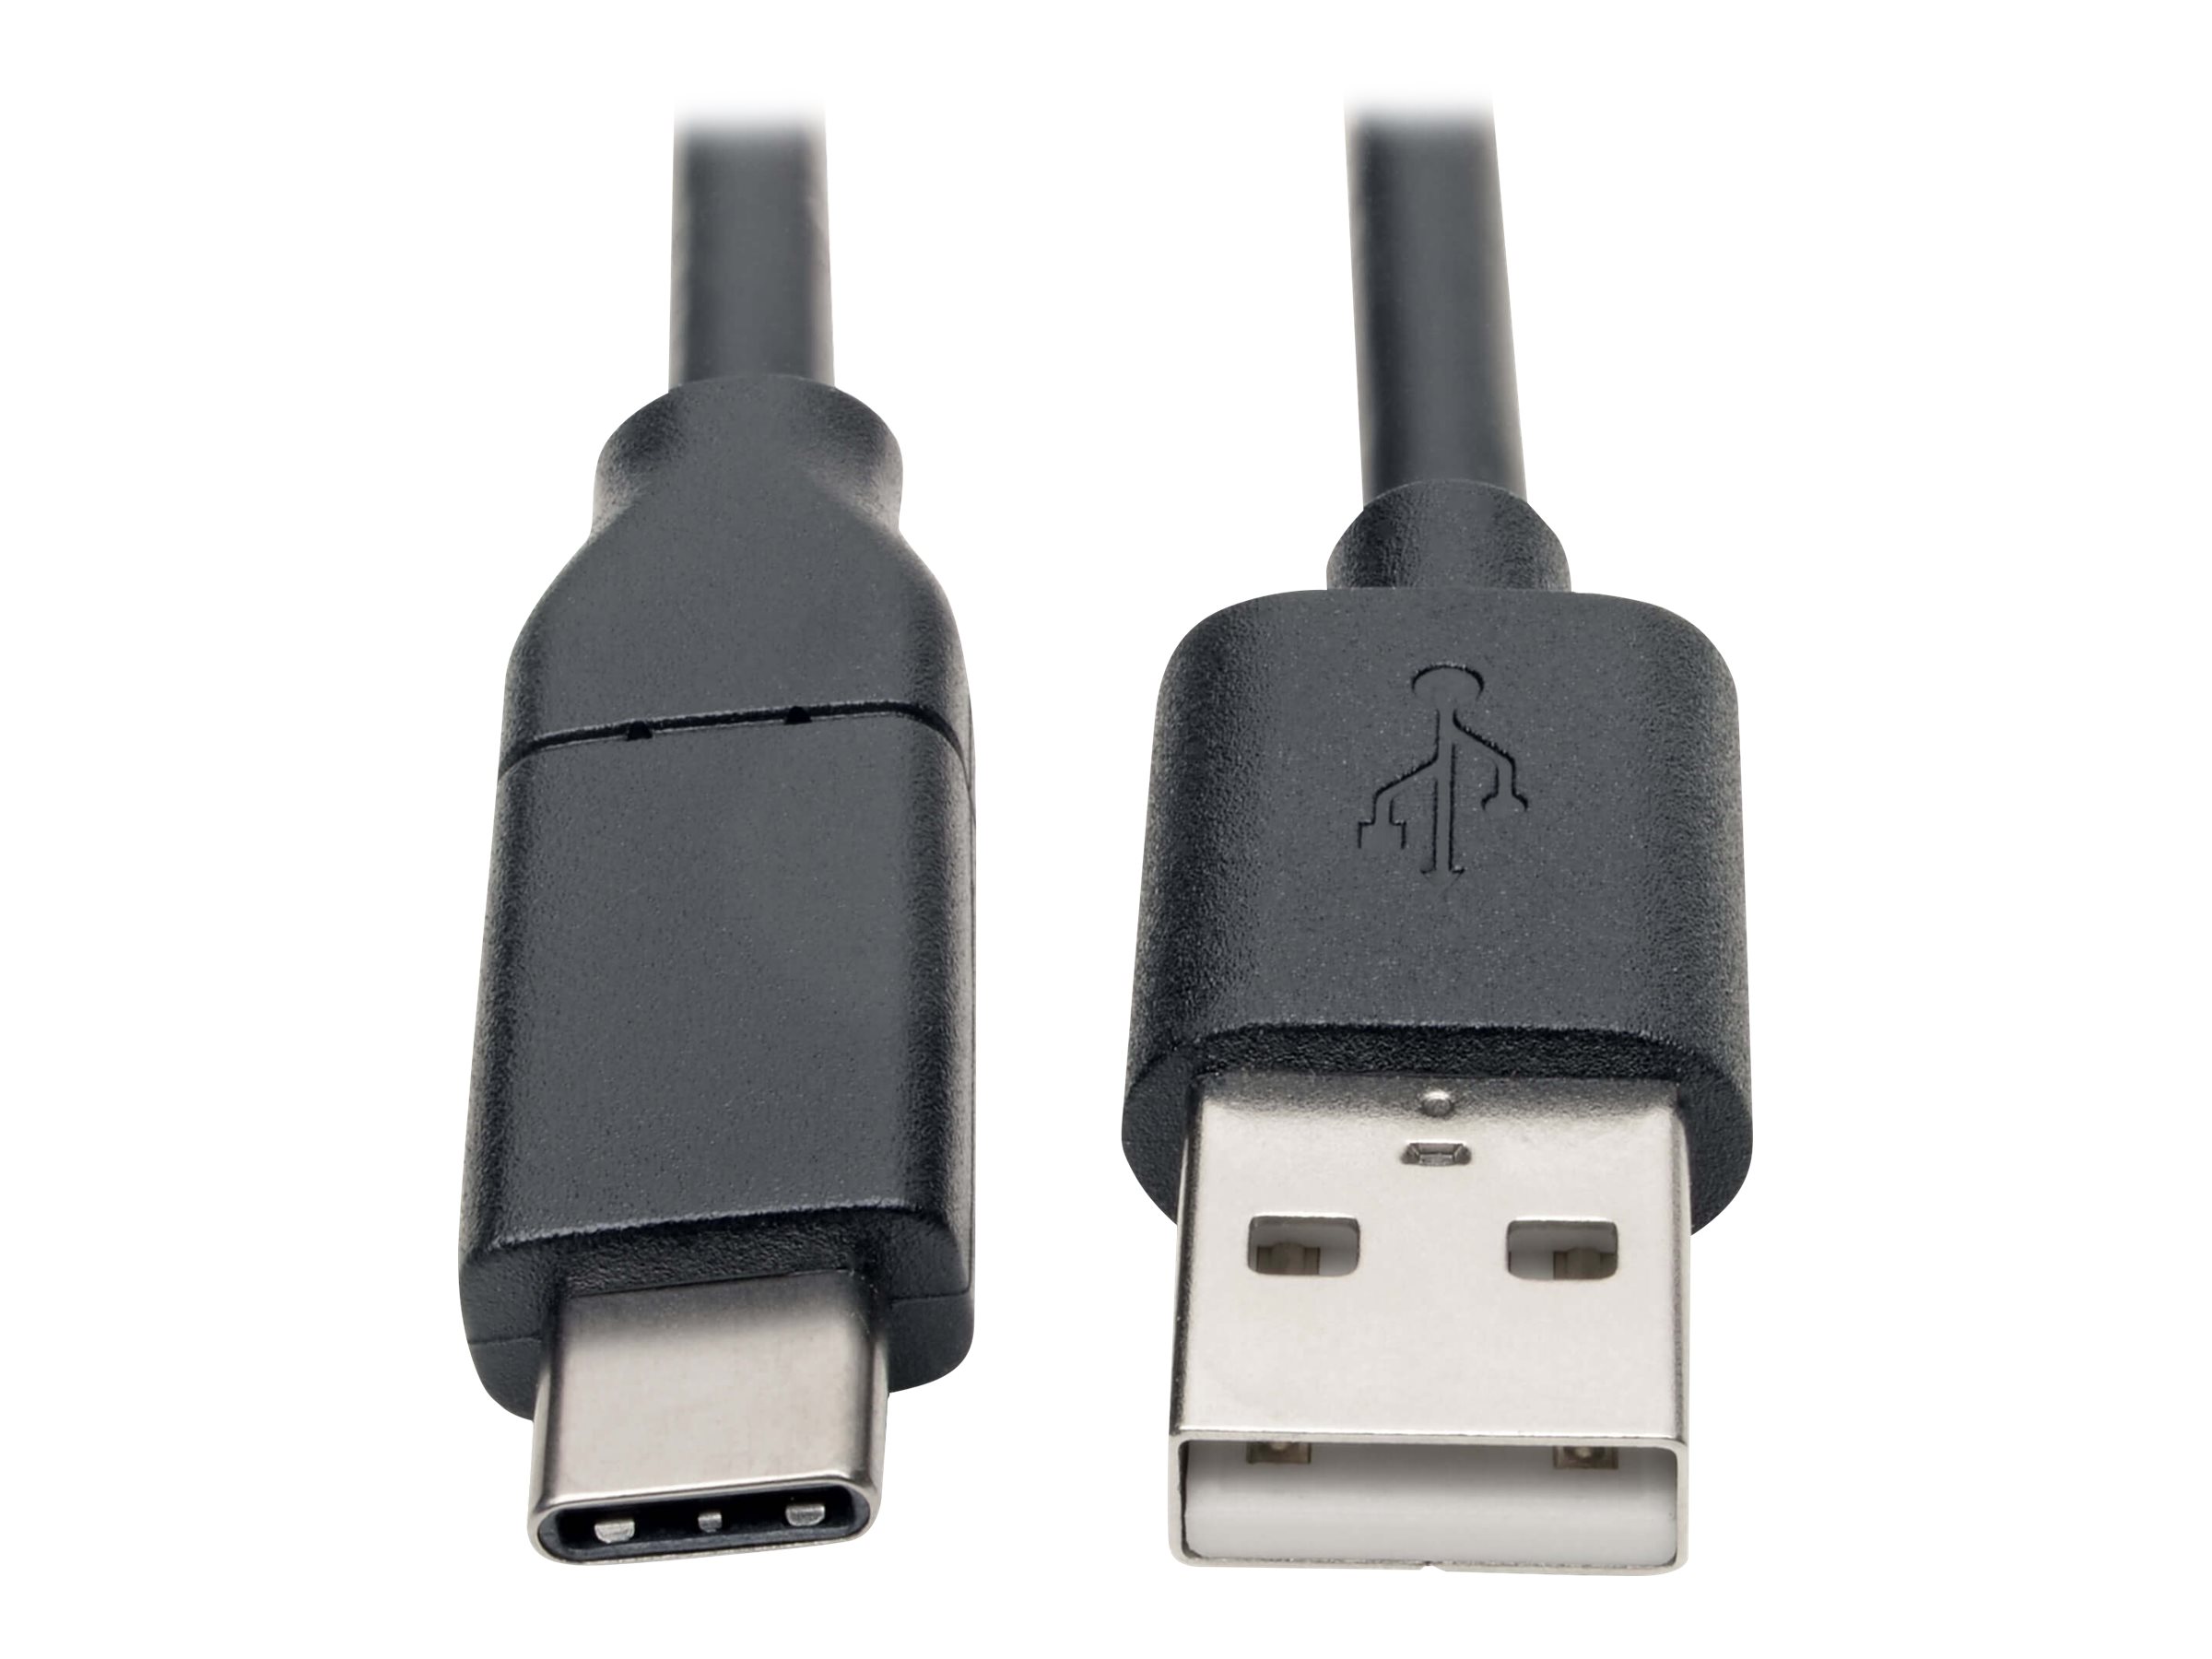 Eaton Tripp Lite Series USB-A to USB-C Cable, USB 2.0, 3A Rating, USB-IF Certified, (M/M), 13 ft. (3.96 m) - USB-Kabel - USB Typ